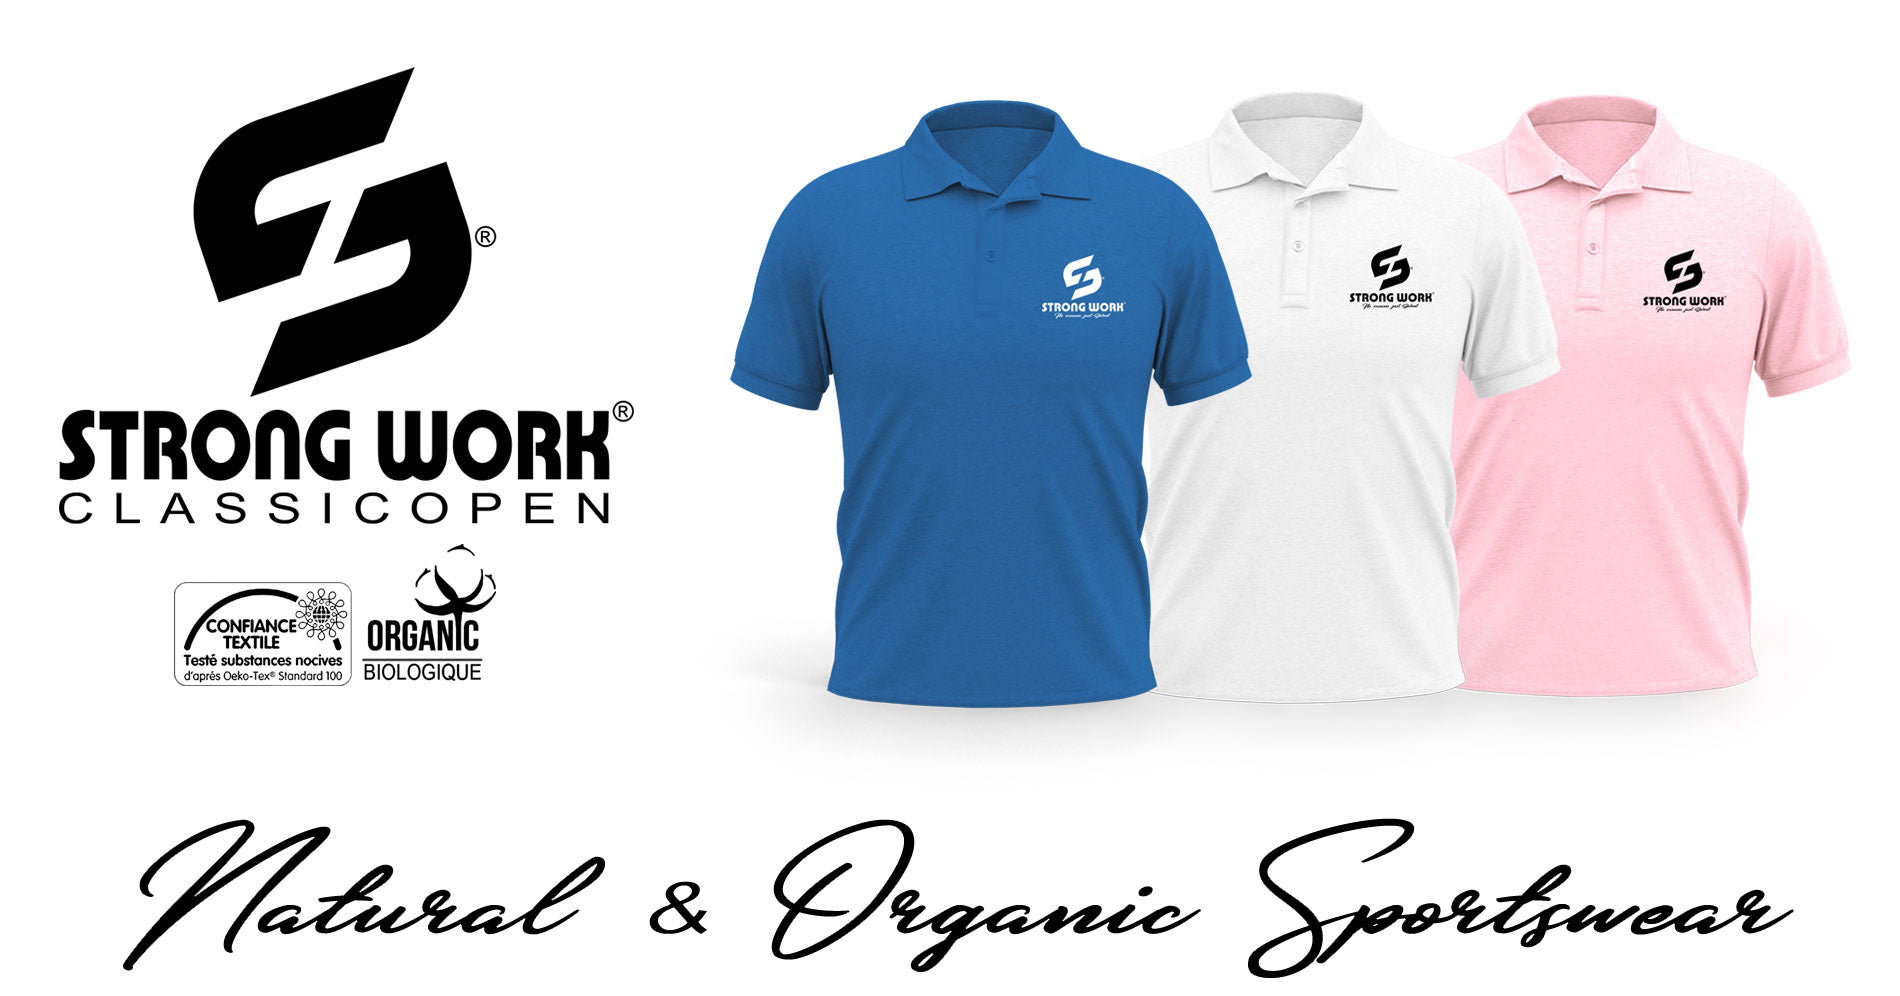 STRONG WORK SPORTSWEAR - Women Collection Strong Work Classic Open